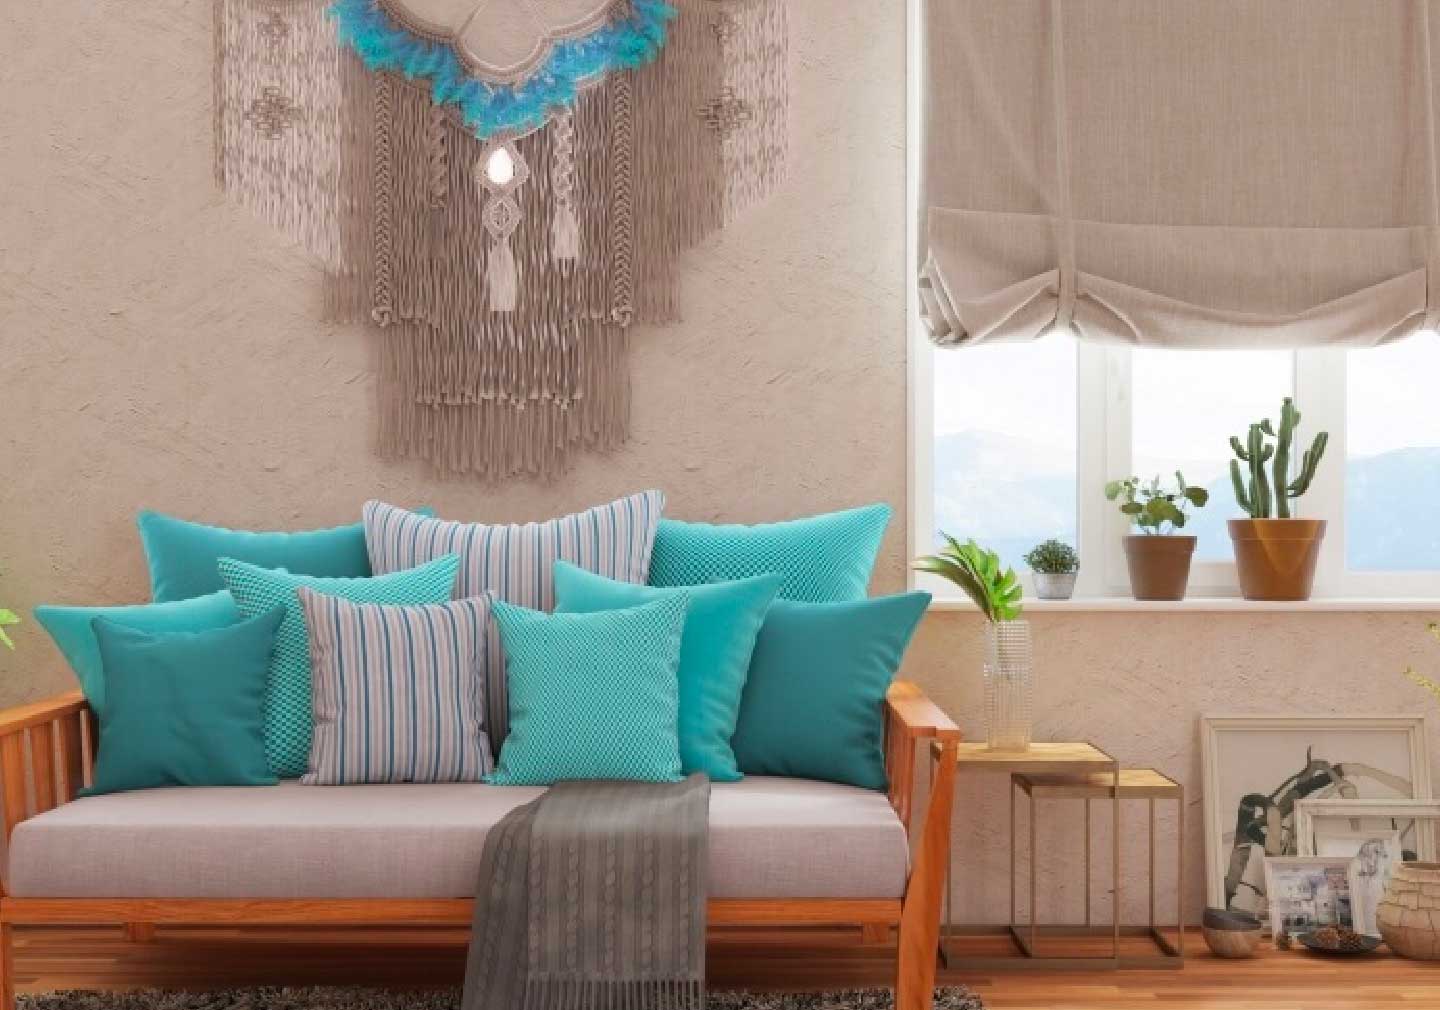 Macrame Wall Hanging Ideas -Wall Decorating Ideas For Room Decor